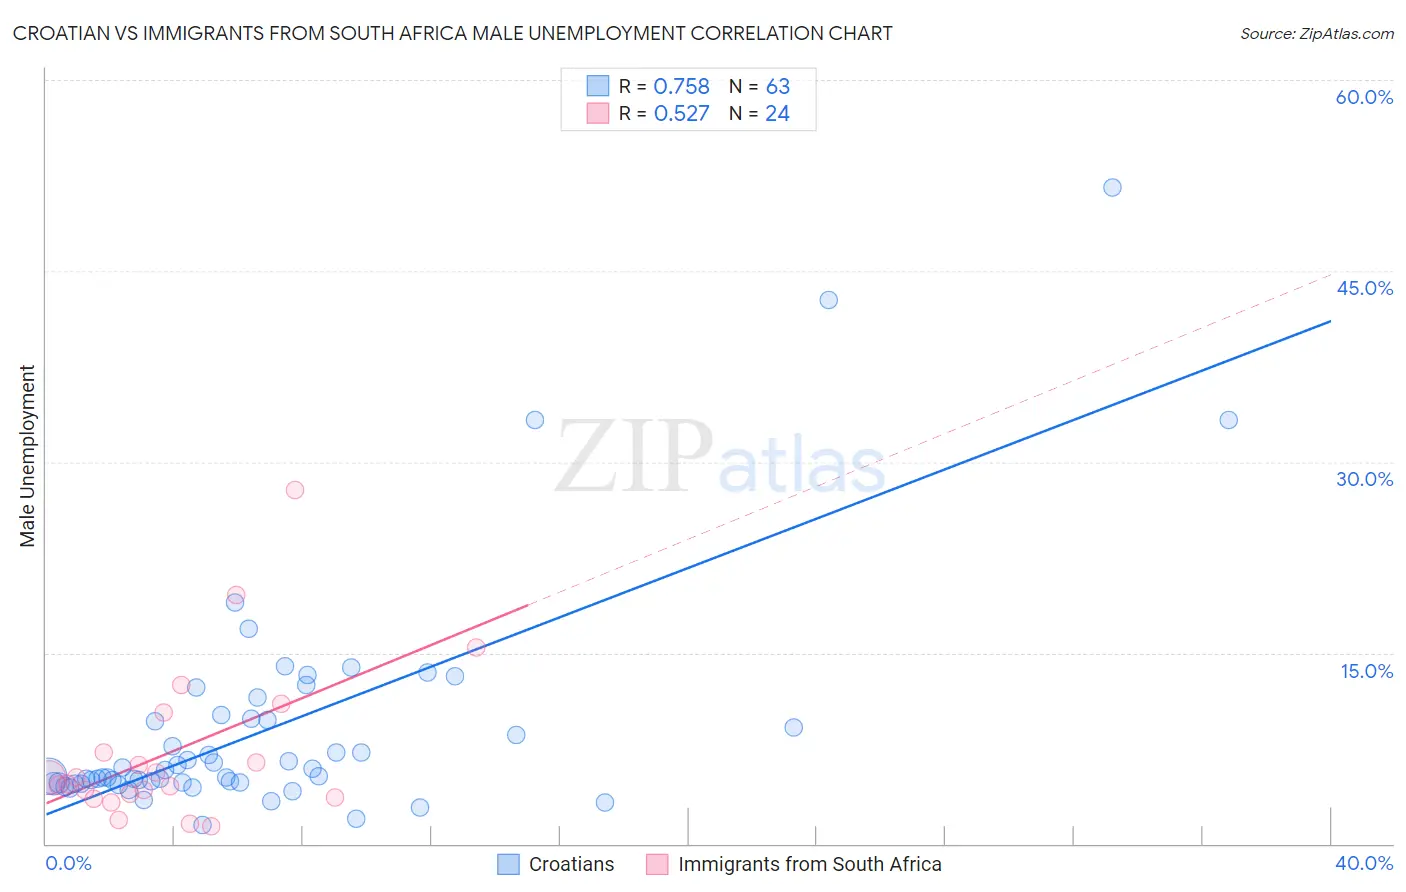 Croatian vs Immigrants from South Africa Male Unemployment